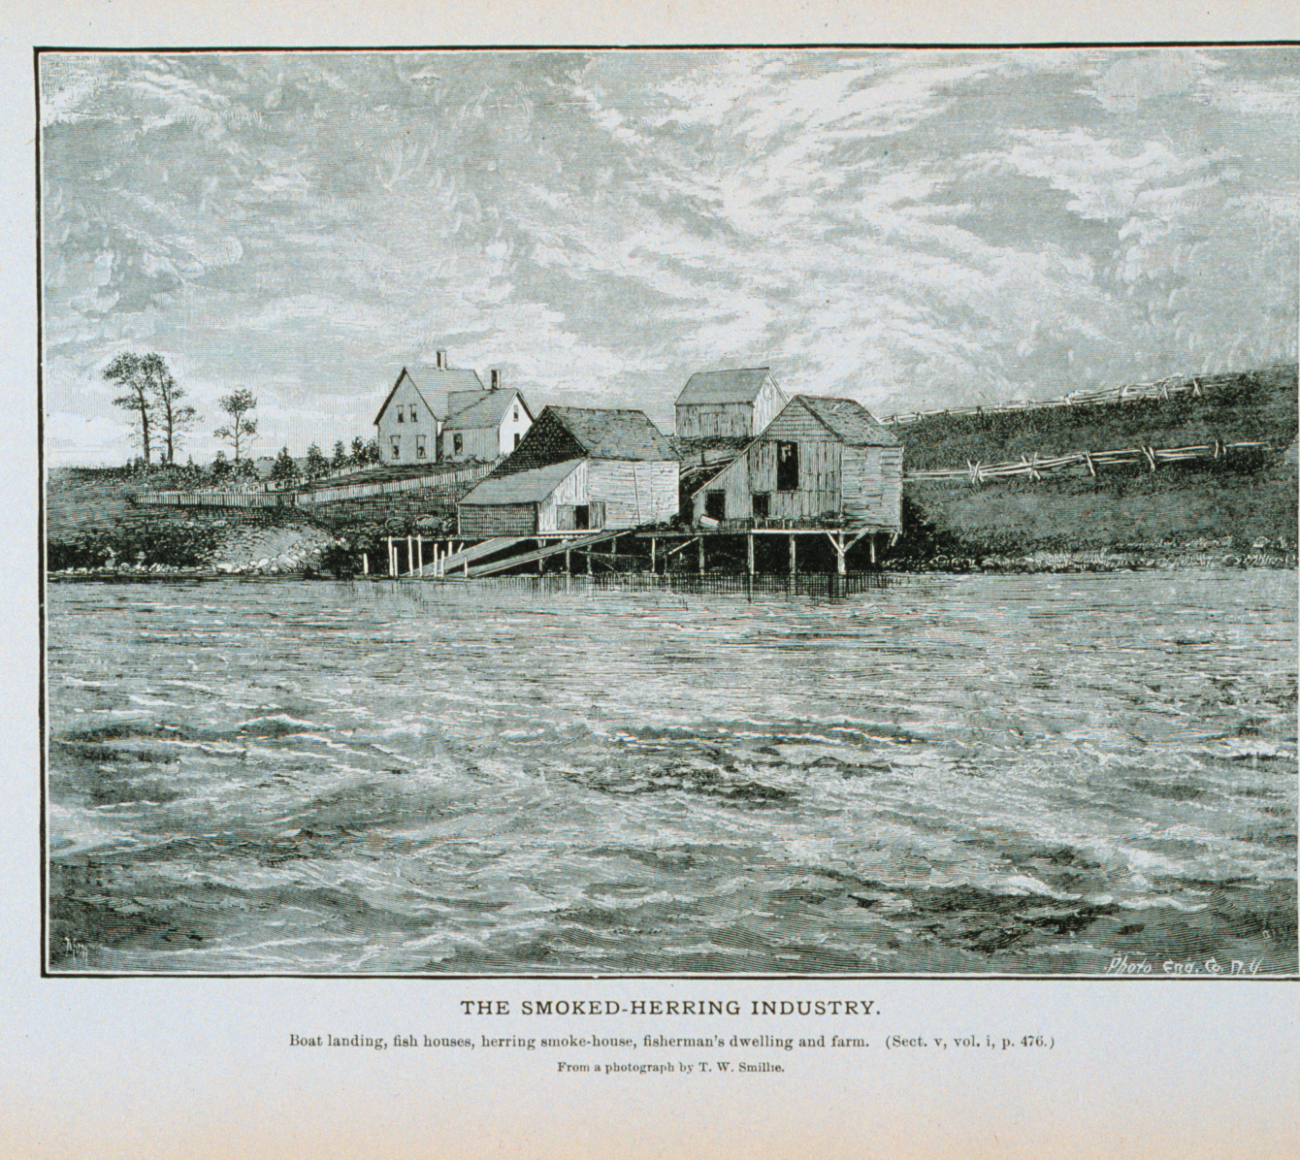 Boat landing; fish houses; herring smoke-house; fisherman's dwelling and farmFrom a photograph by T